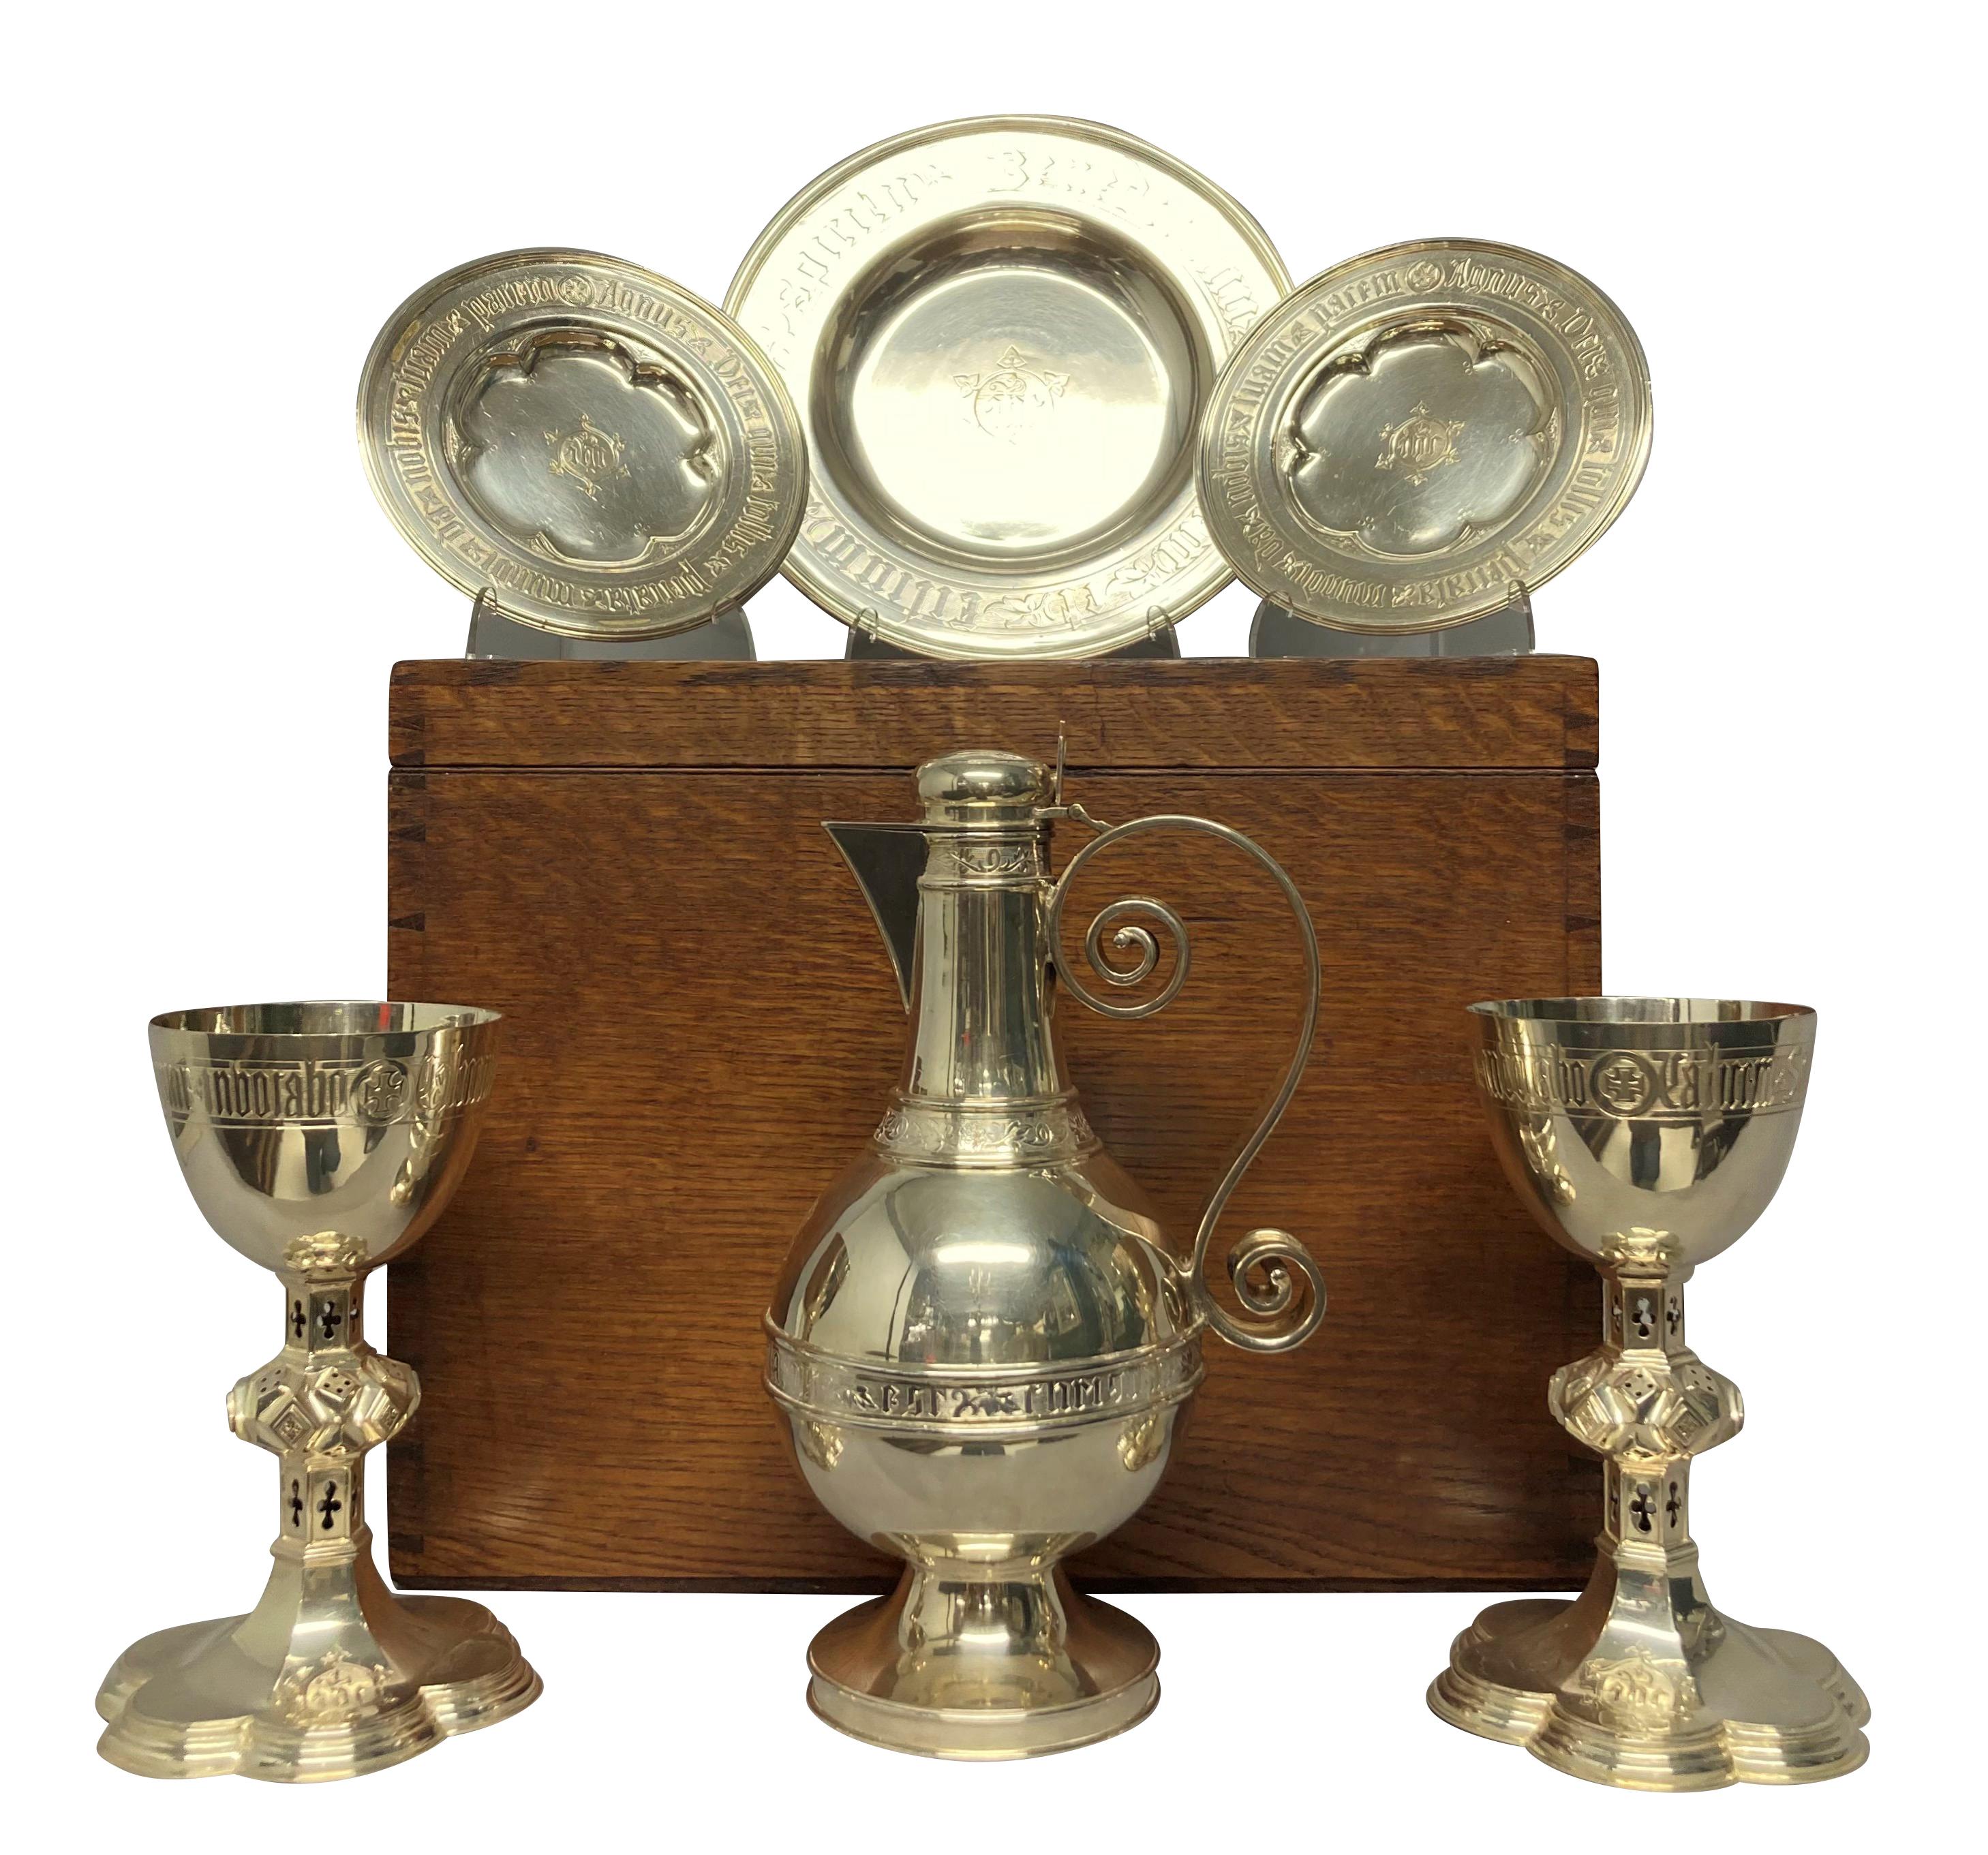 An English Gothic silver plated communion set with their original box by Henry Wilkinson & Sons of Sheffield. Comprising two chalices, two patens, a ewer and a plate. Each ornately engraved and stamped. The chalices are also numbered. The oak box,